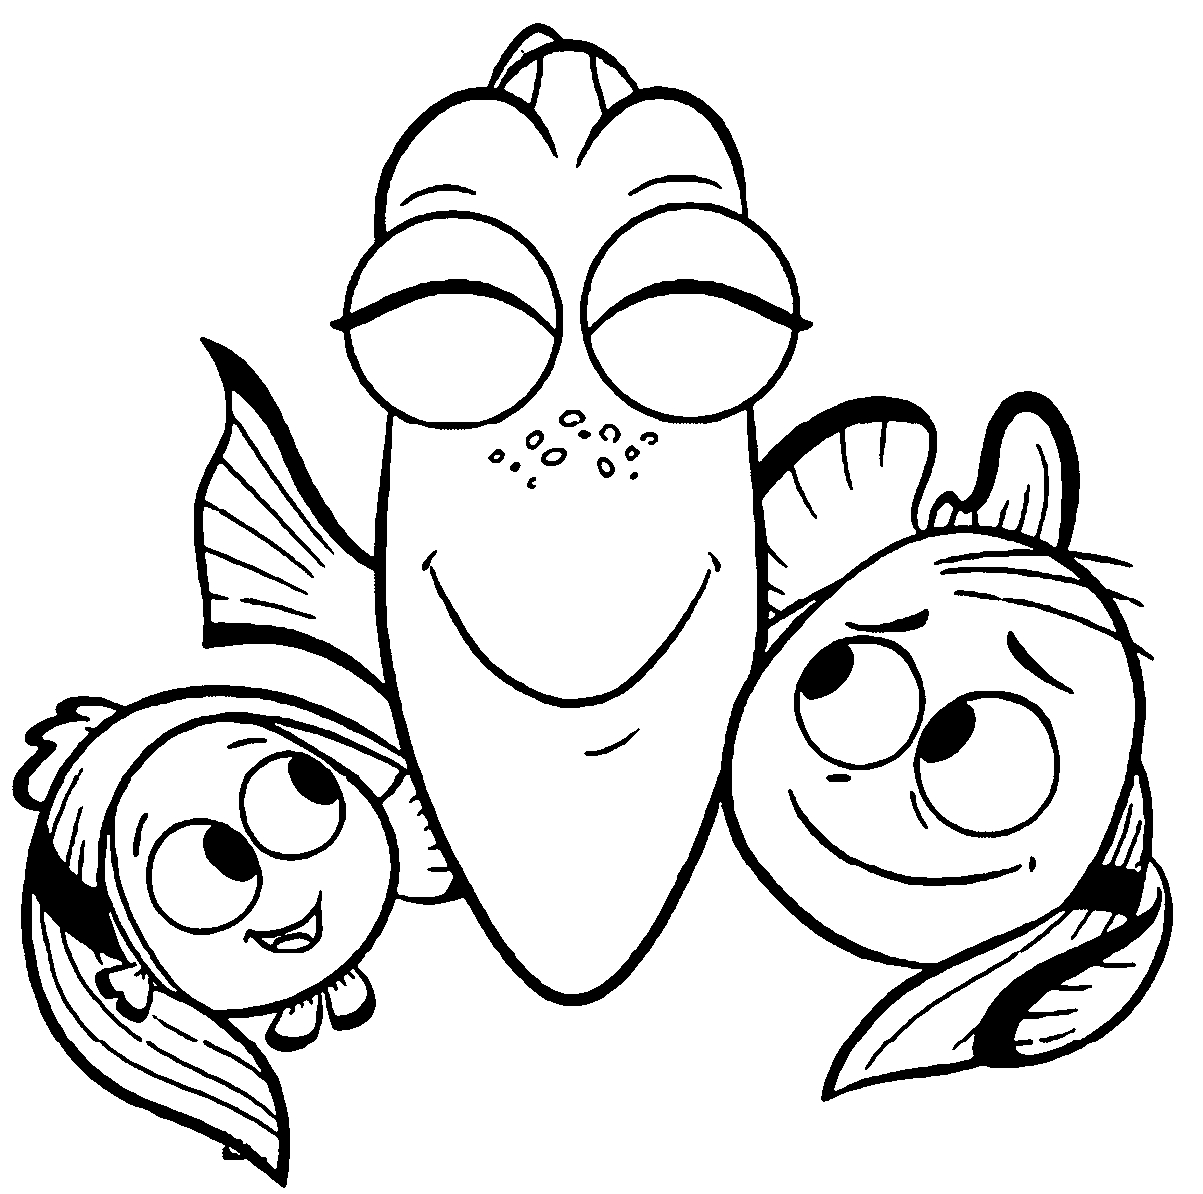 Dory Coloring Pages Best Coloring Pages For Kids Coloring Wallpapers Download Free Images Wallpaper [coloring436.blogspot.com]